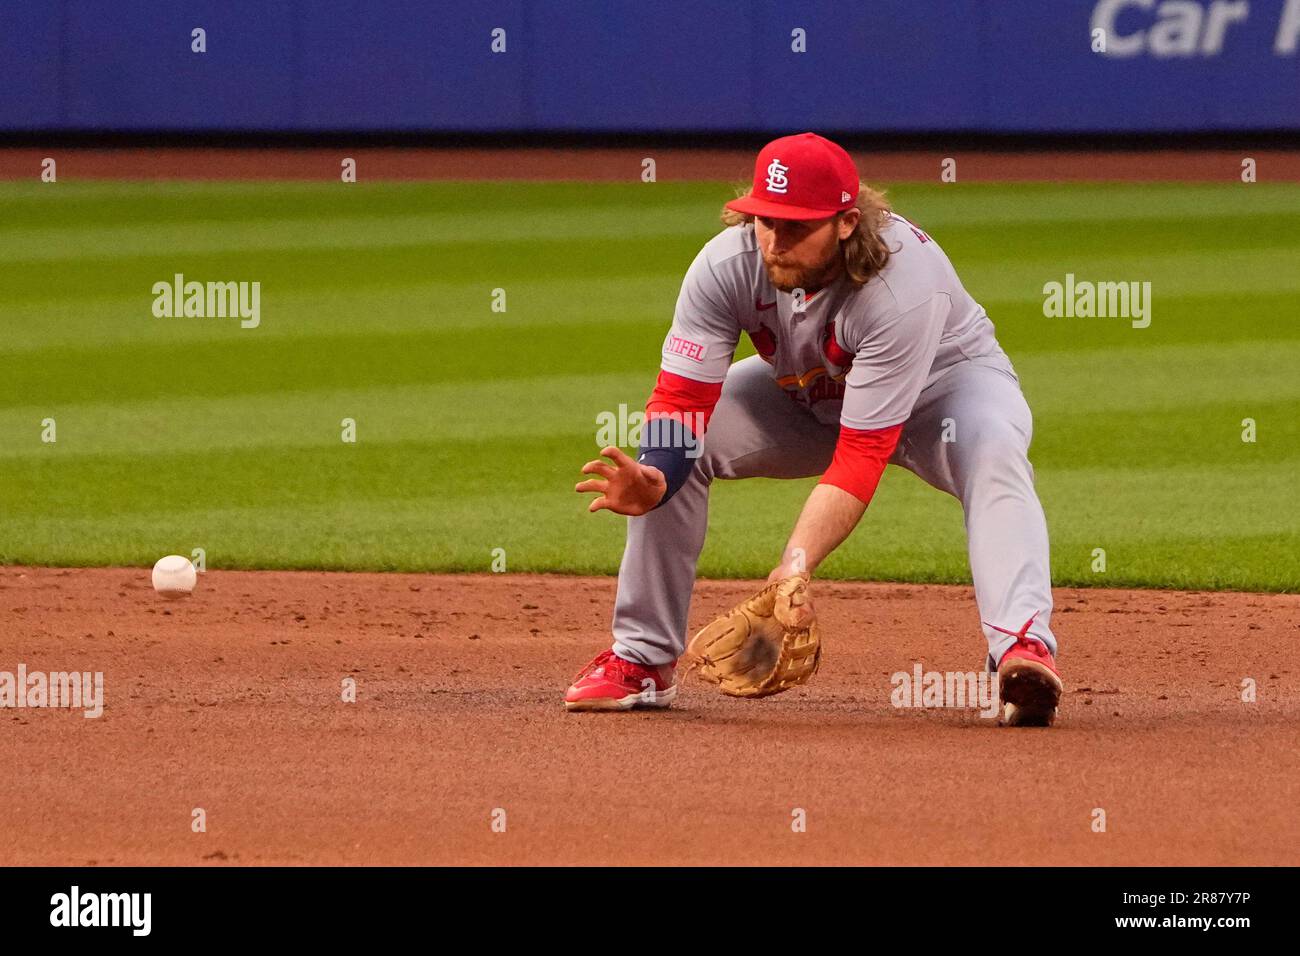 FLUSHING, NY - JUNE 16: St. Louis Cardinals Second Baseman Brendan Donovan  (33) fields a ground ball hit by New York Mets First Baseman Mark Canha  (19) (not pictured) during the second